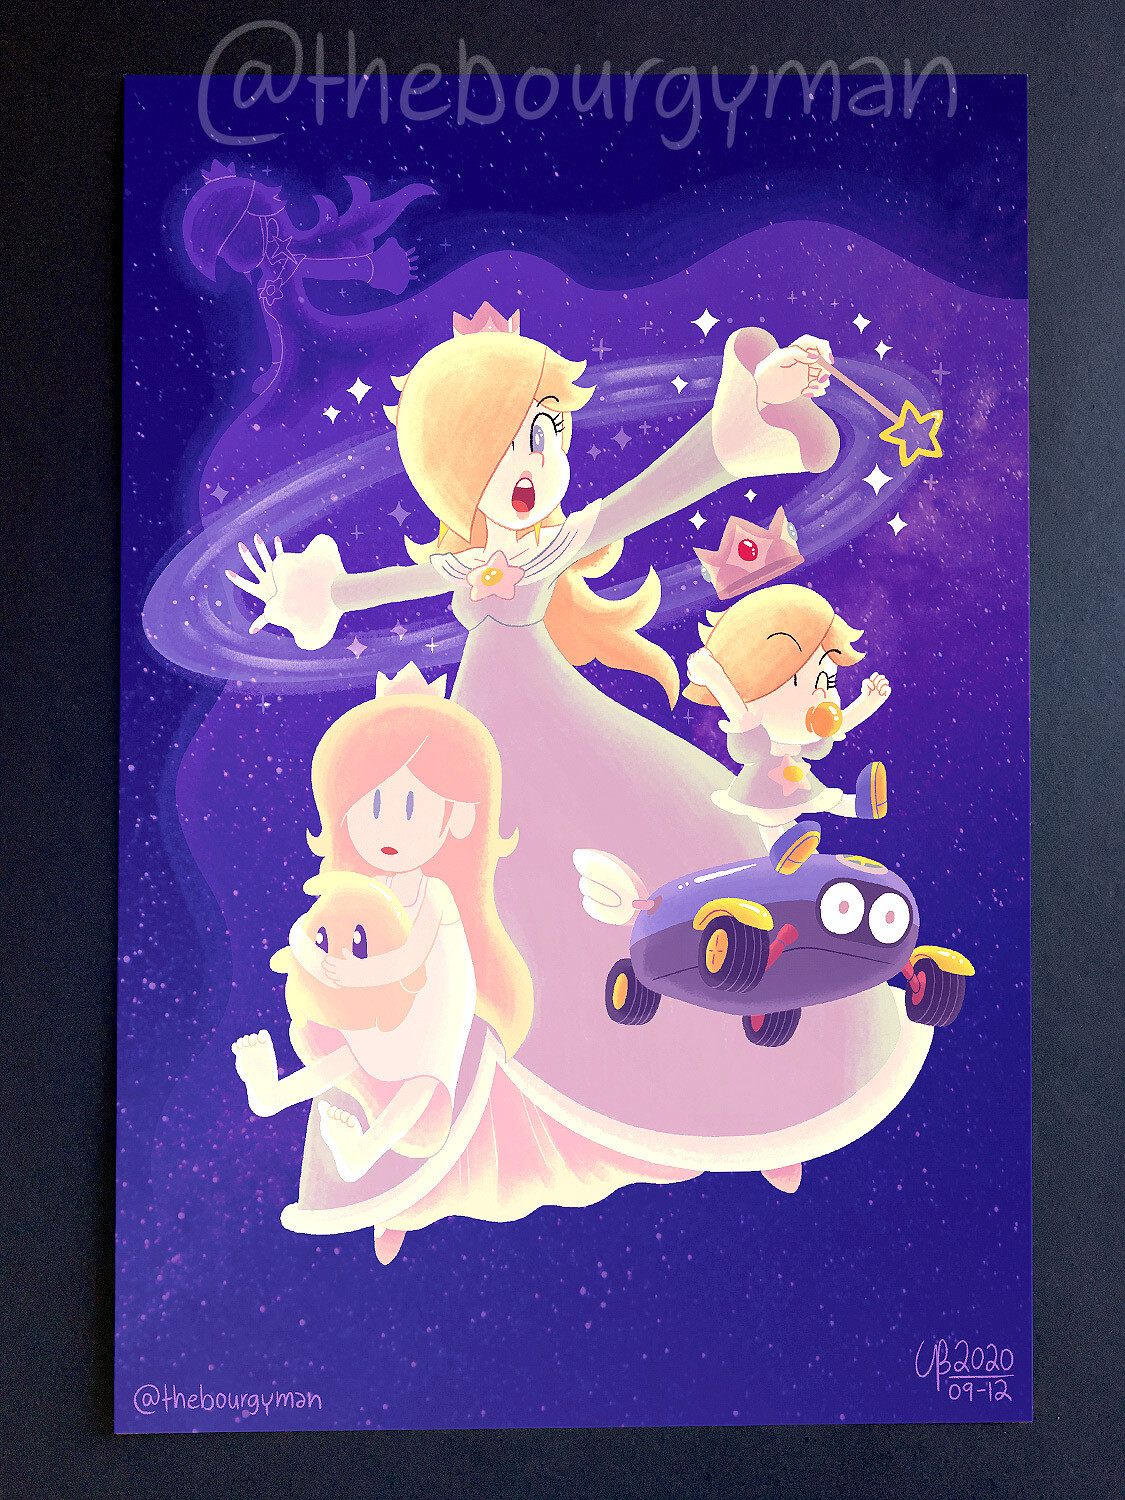 Watcher of the Cosmos (Super Mario) 12 x 18" poster/affiche